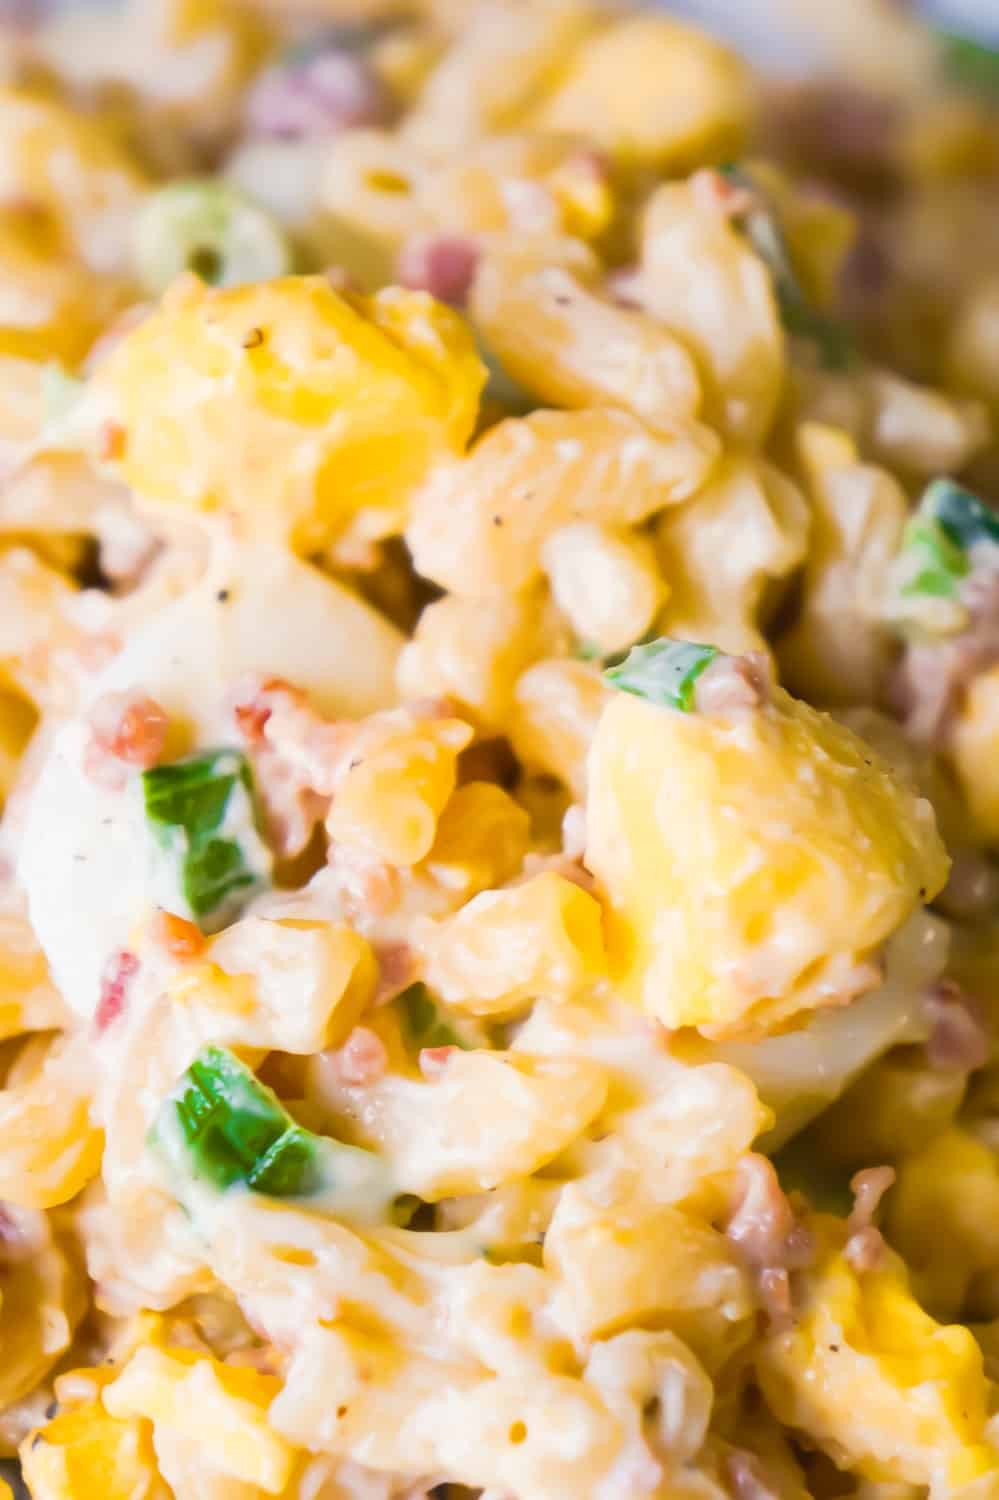 Bacon Egg Pasta Salad is a delicious cold side dish recipe. This pasta salad loaded with real bacon bits and hard boiled eggs is perfect for potlucks and BBQs.